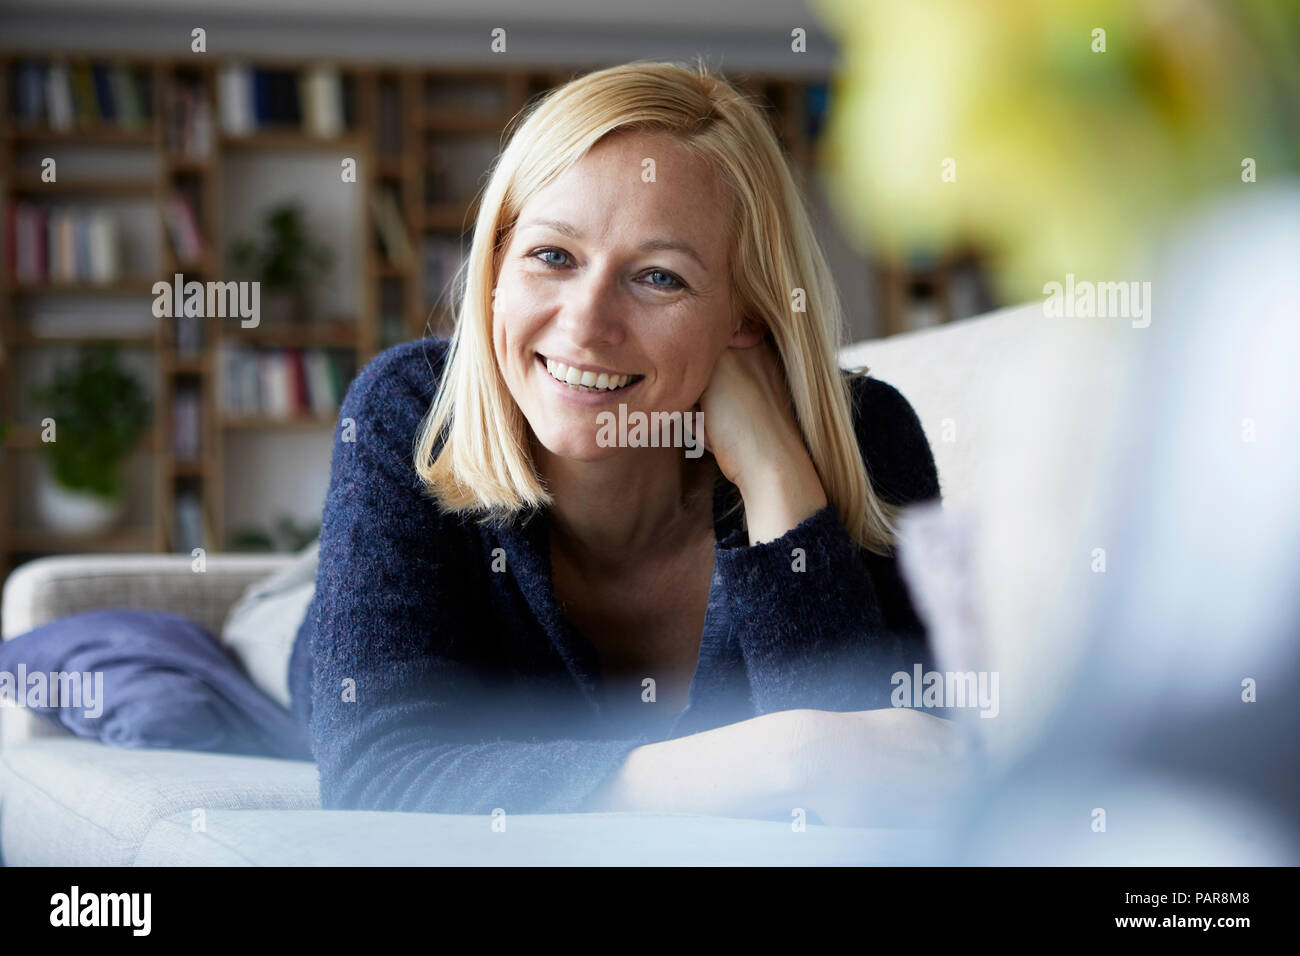 Woman relaxing at home, sitting on couch Stock Photo